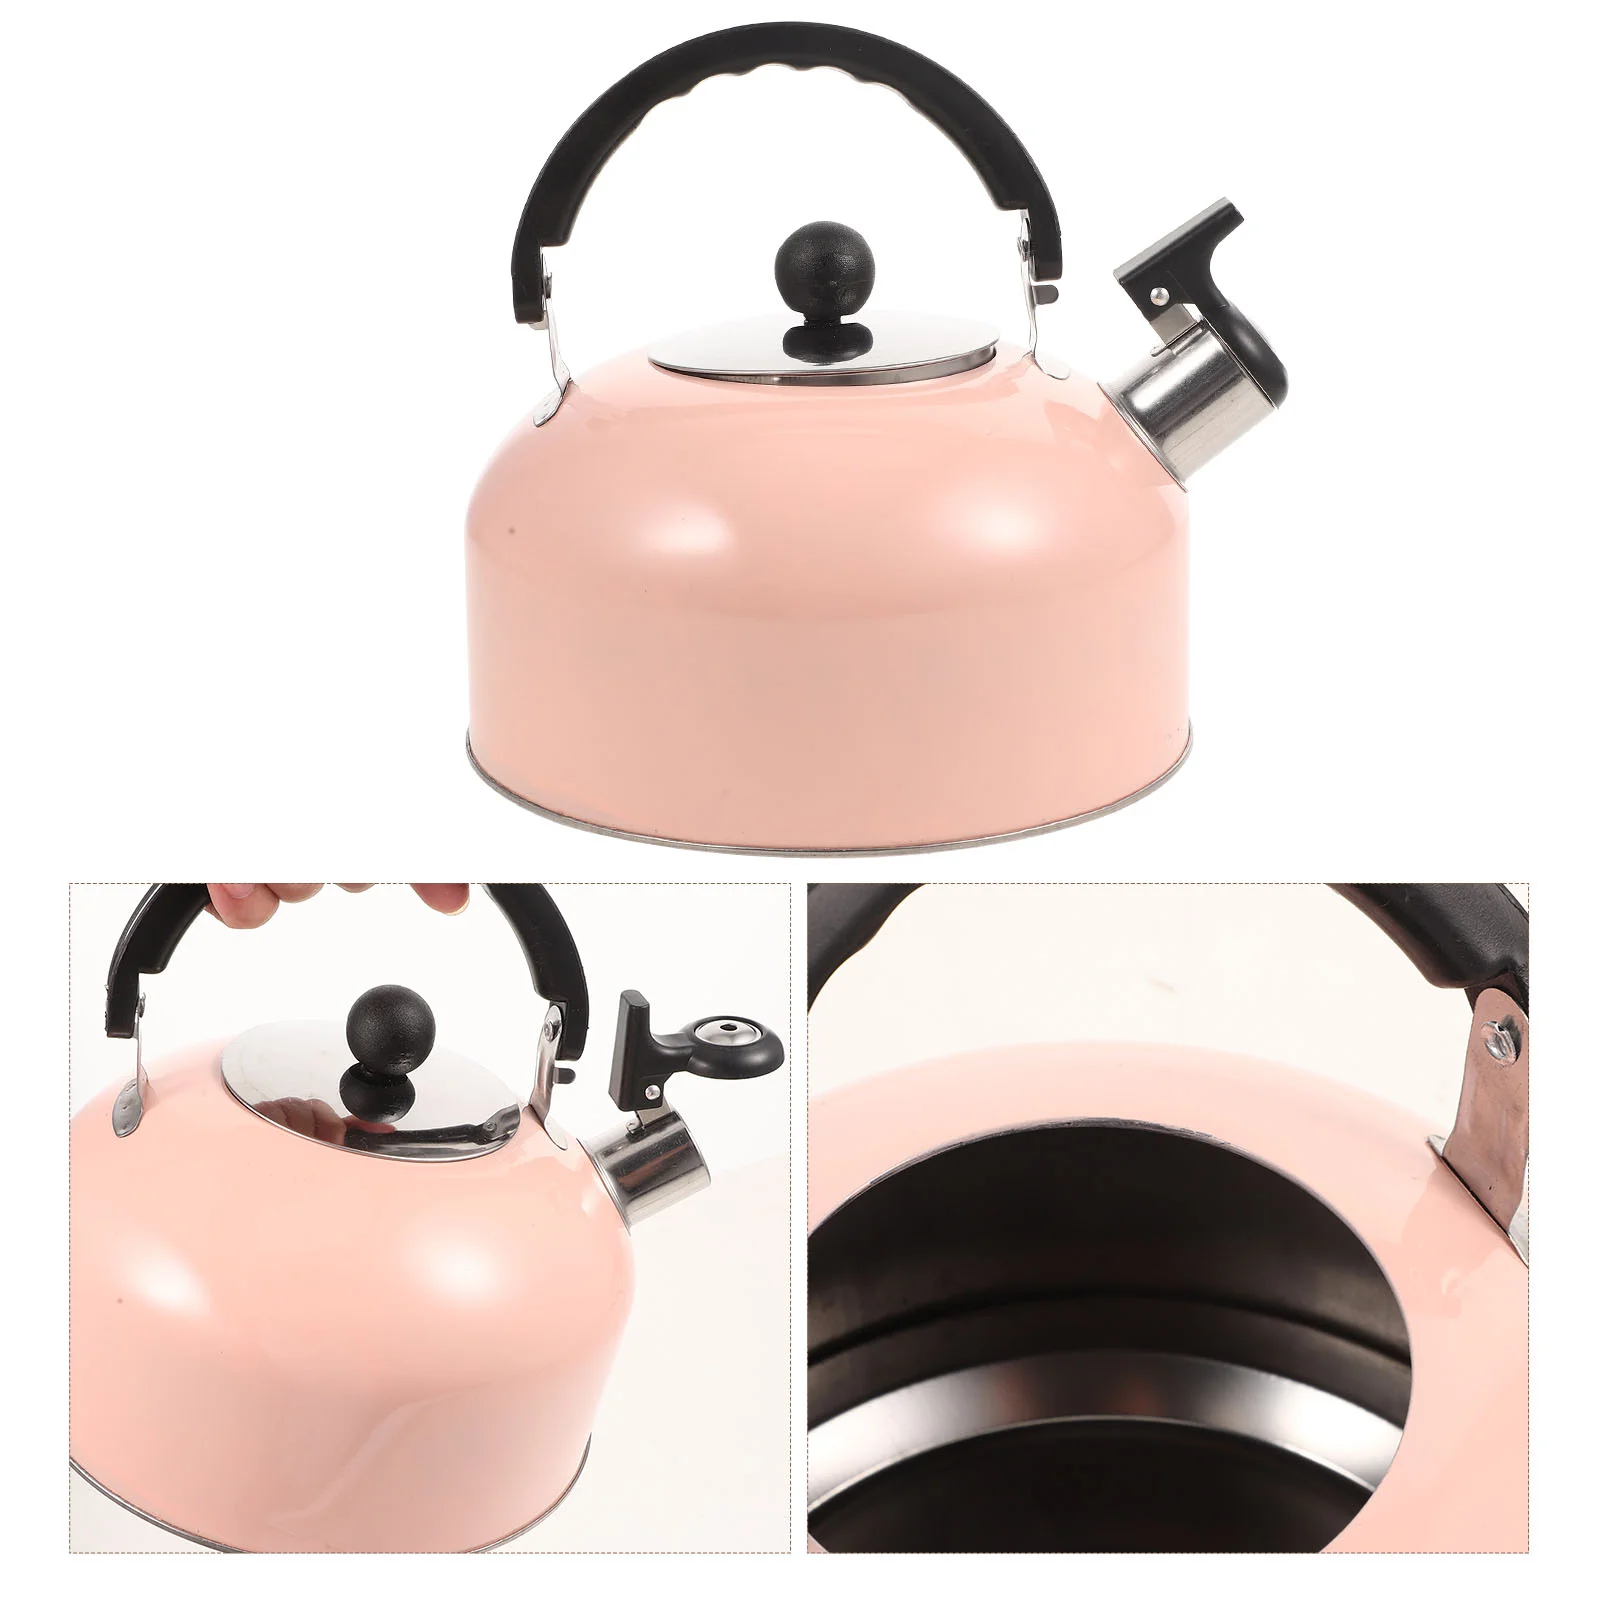 

Kettle Water Whistling Boiling Teapot Pot Stainless Steel Tea Kettles Stovetop Boiler Container Stove Heating Whistle Flat